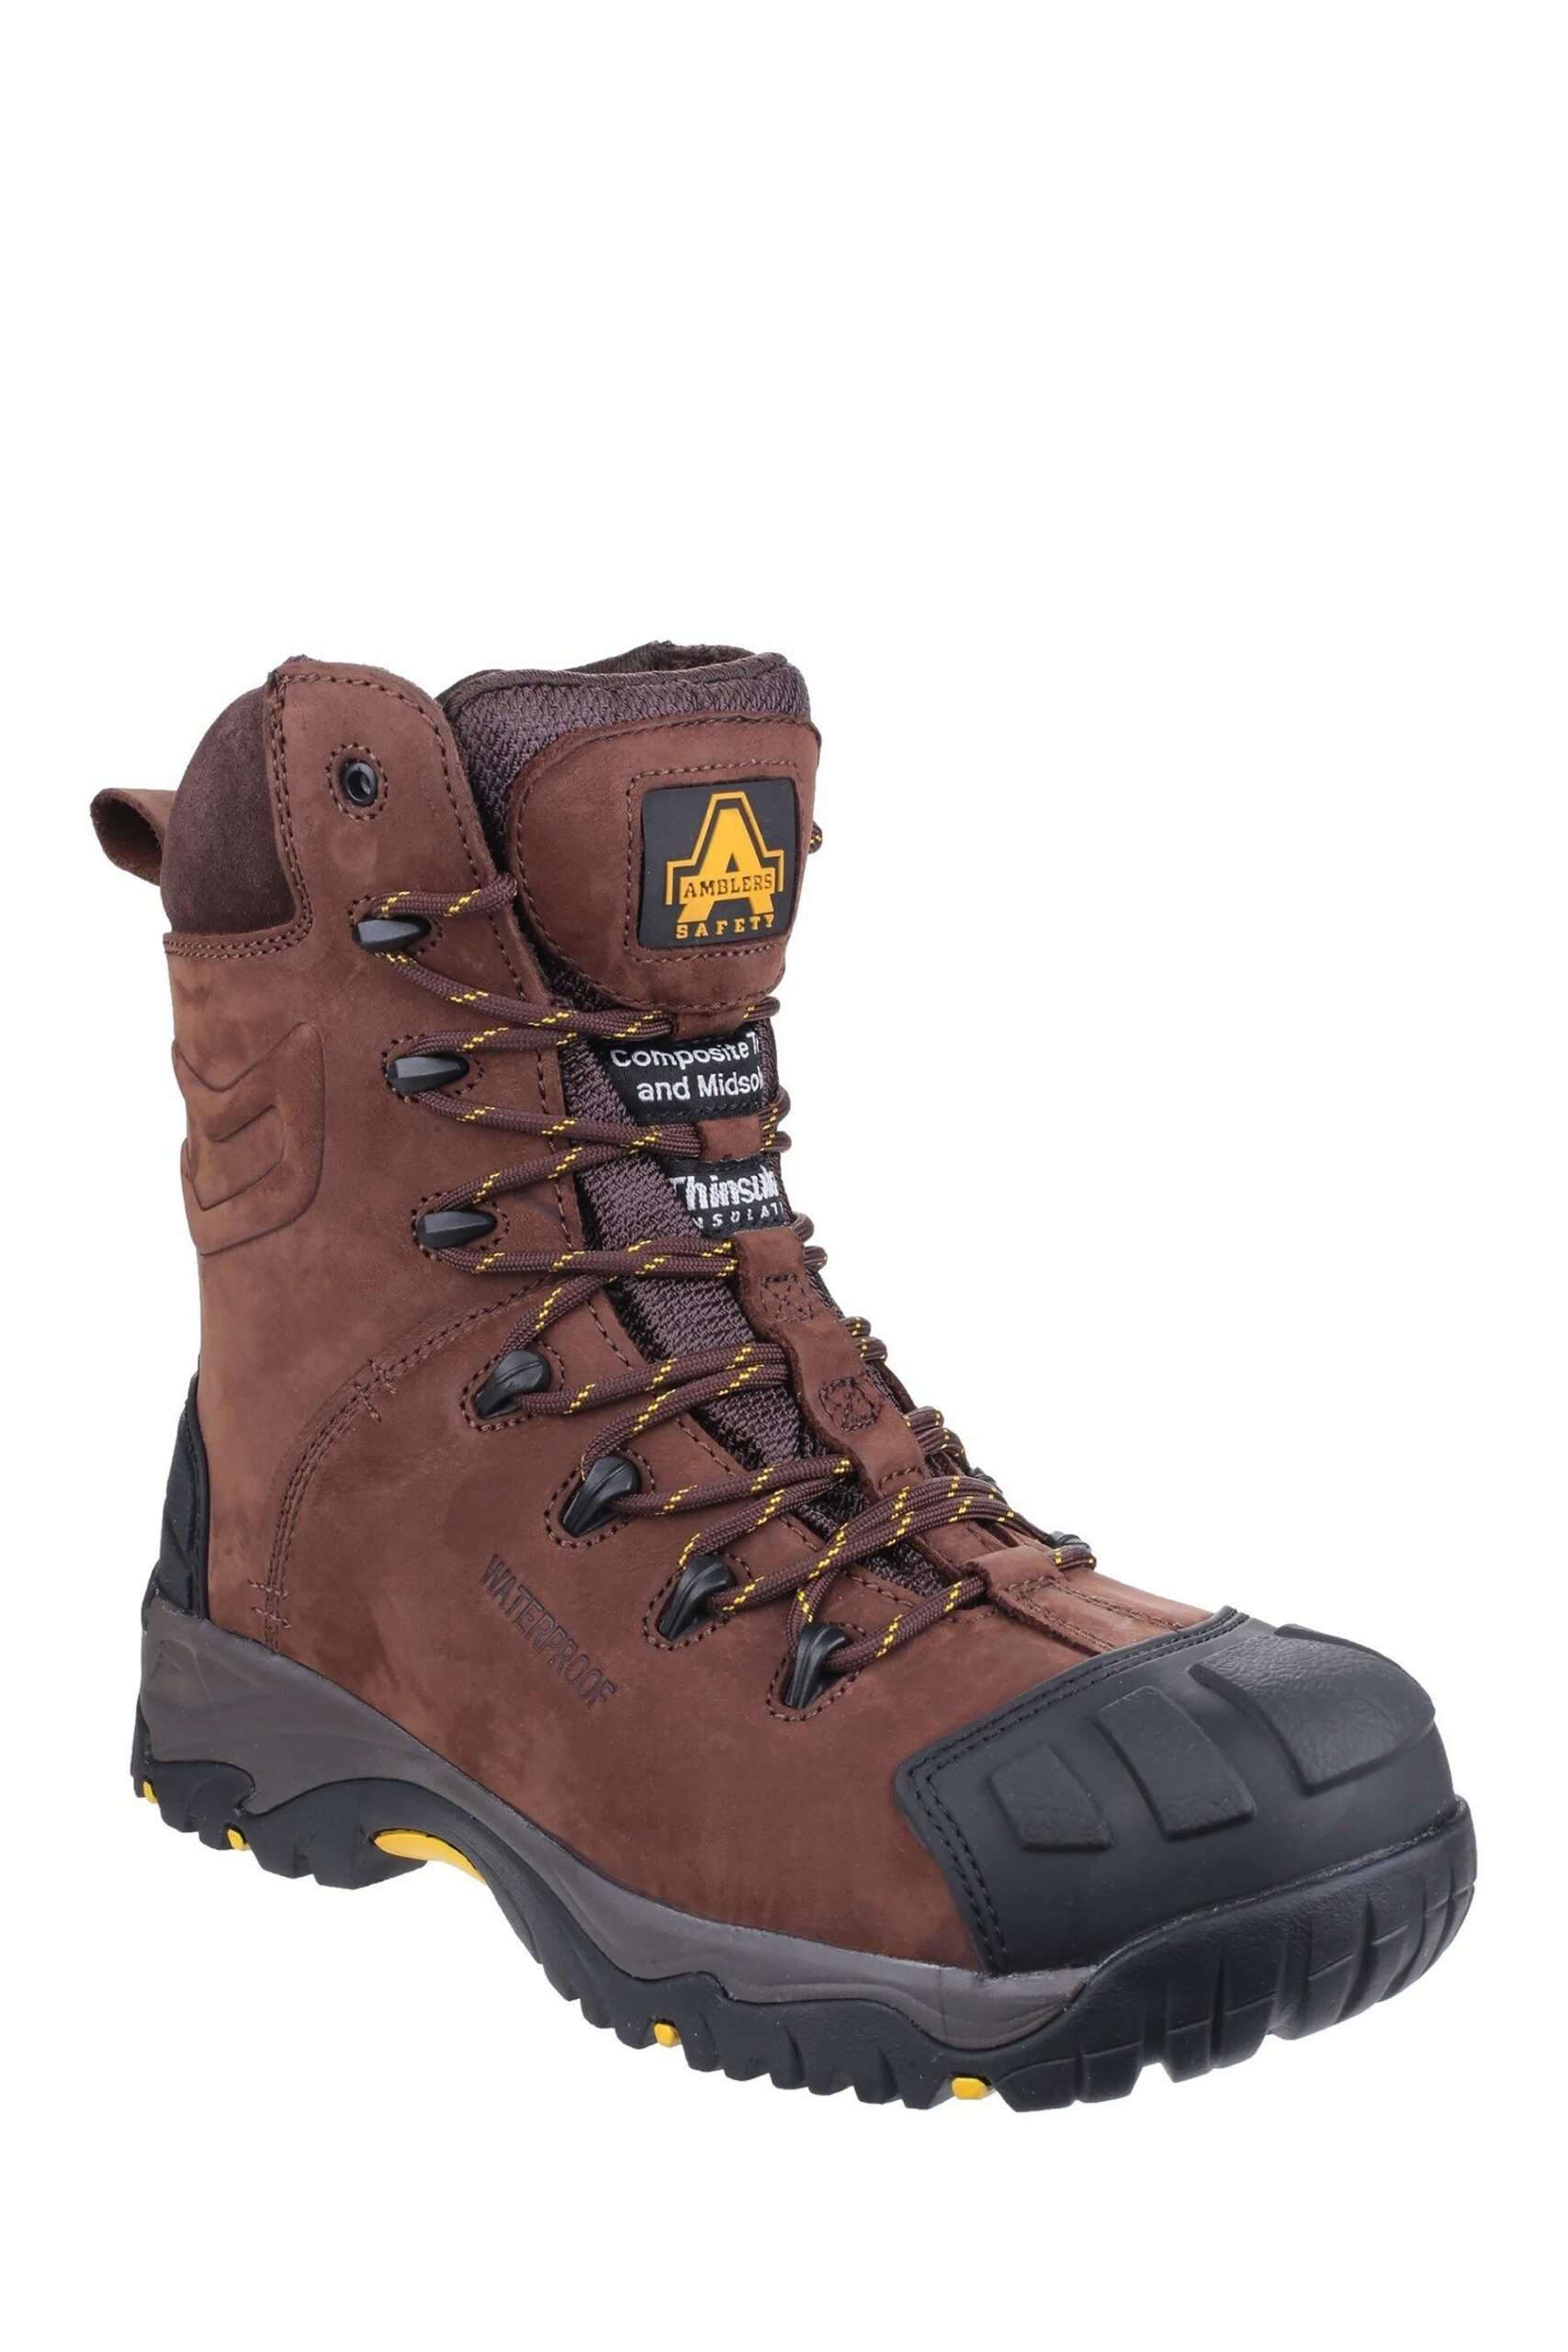 Thinsulate Boots For Excellent Feet
  Warmth And Functionality